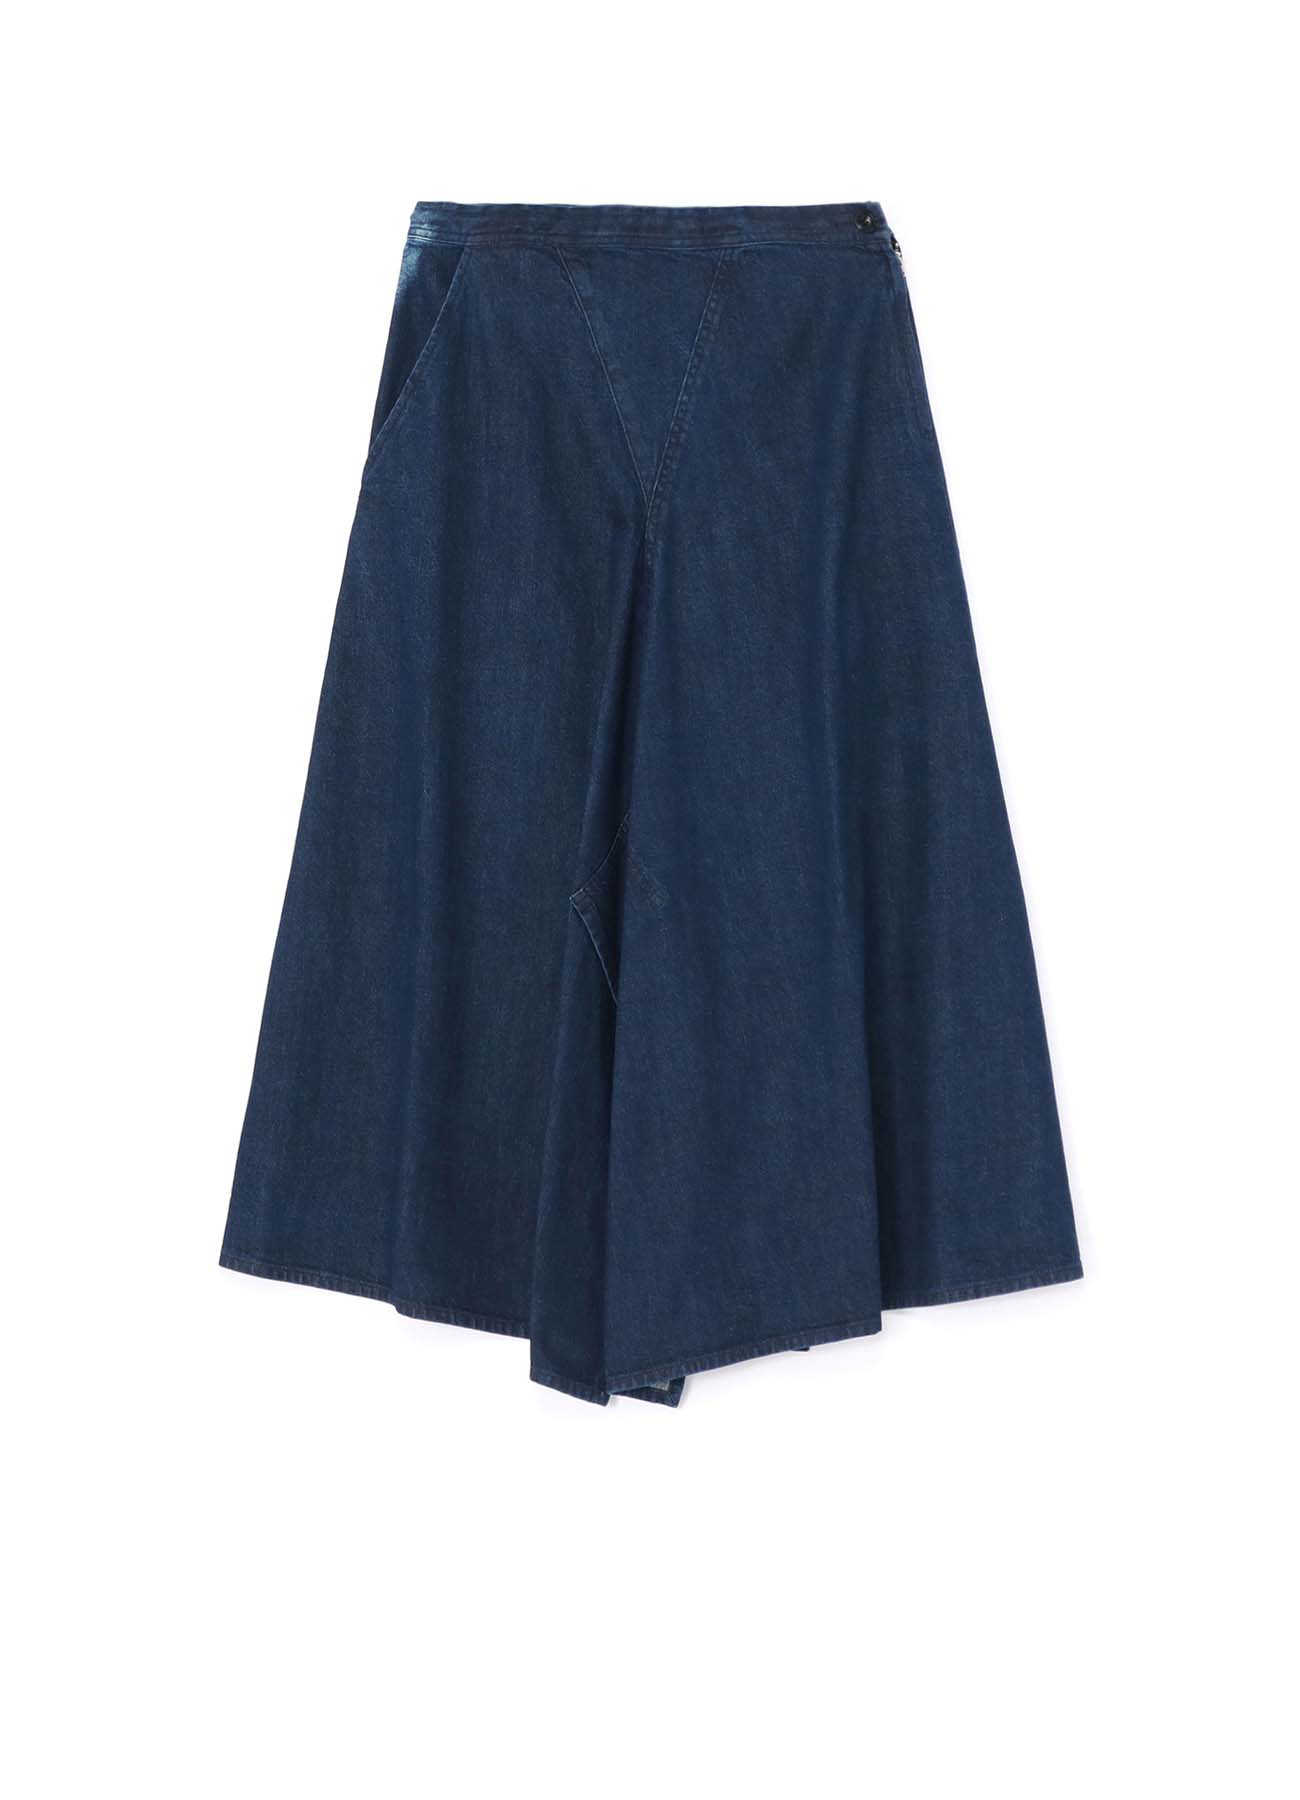 SPOTTED DENIM TRIANGLE GUSSET FLARE SKIRT PANTS